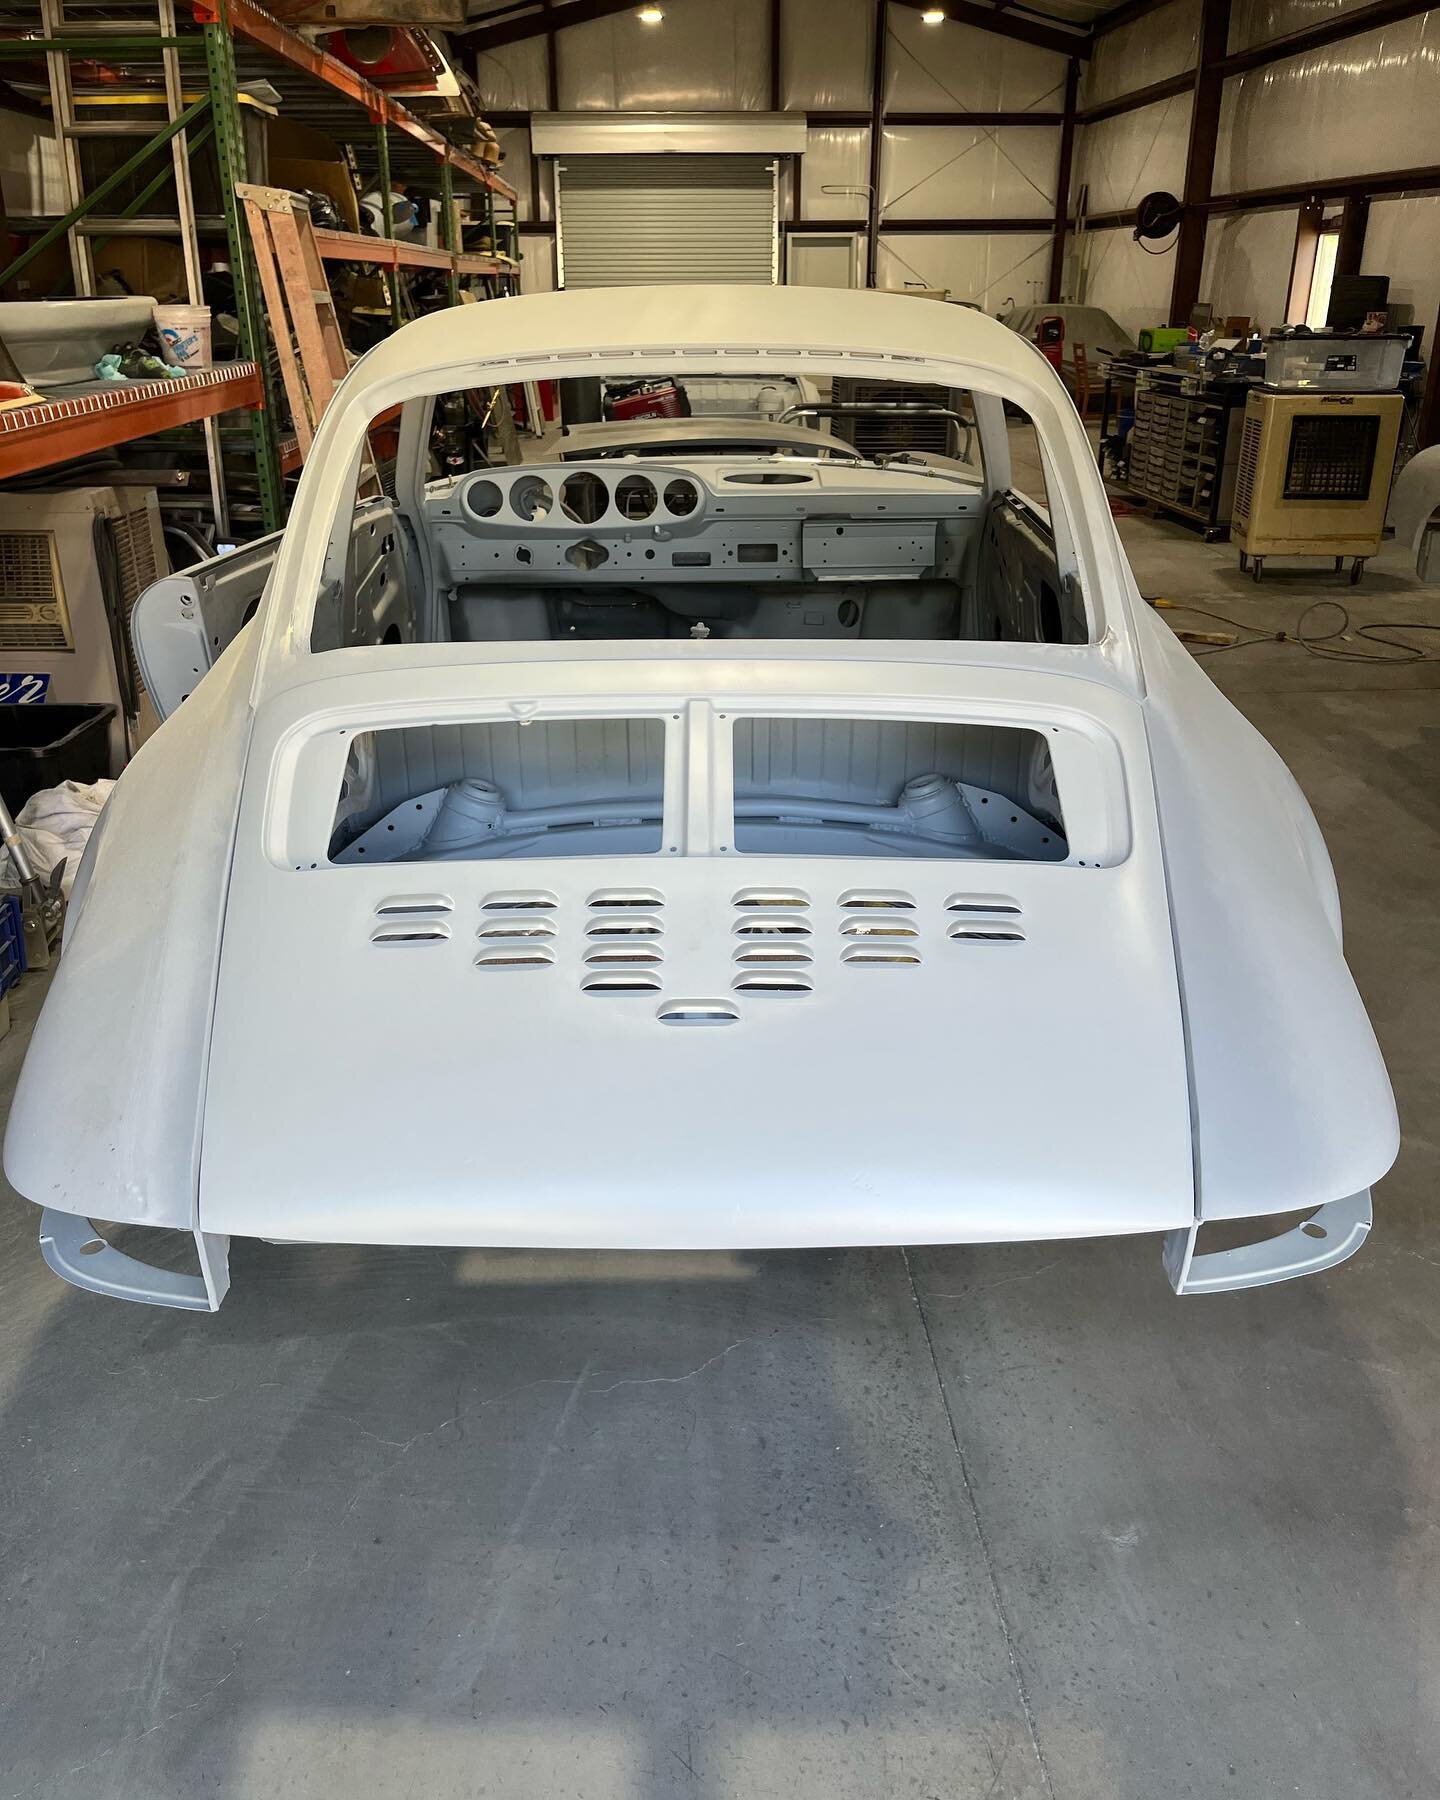 Decklid louvers on the 66 complete, on to the front end 🍻 
.
.
.
.
#porsche #porsche911 #911 #porscheclub #porschelife #porscheclassic #porschemoment #porschelove #porschefans #911porsche #porsche911r #porscheoutlaw #cars #johnjamesracing